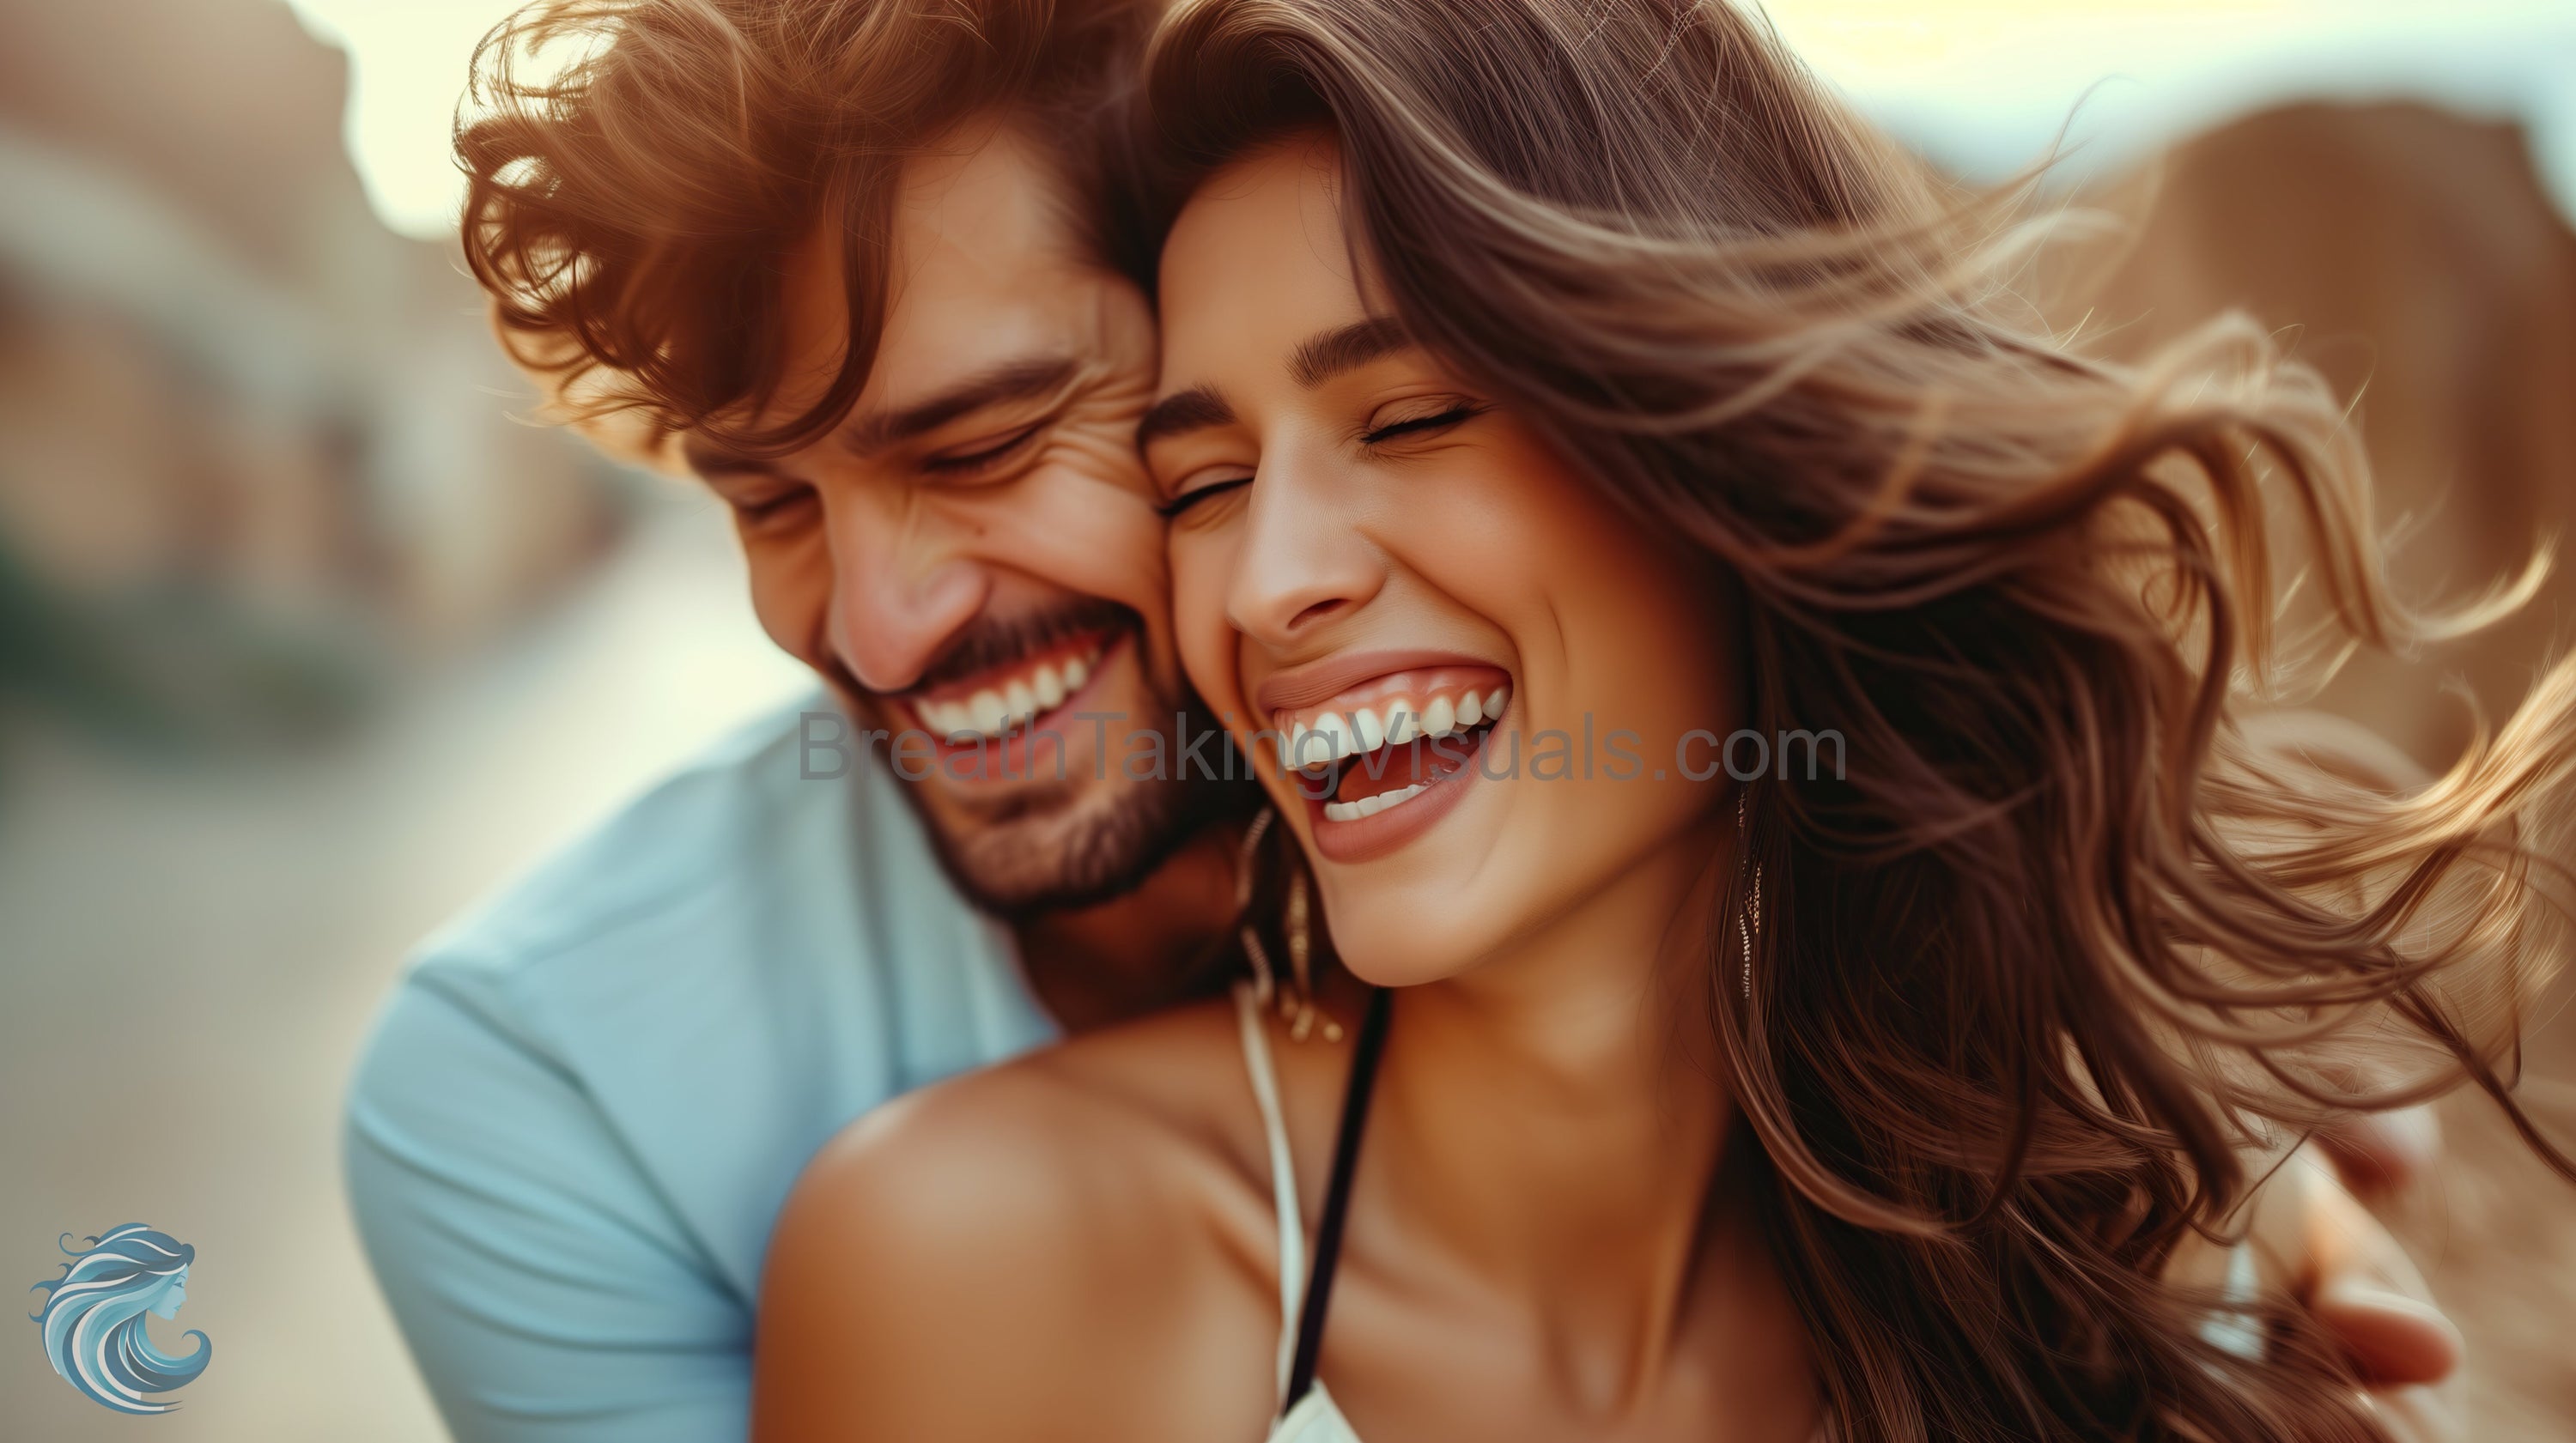 Laughter in Love - Joyous Couple Embrace